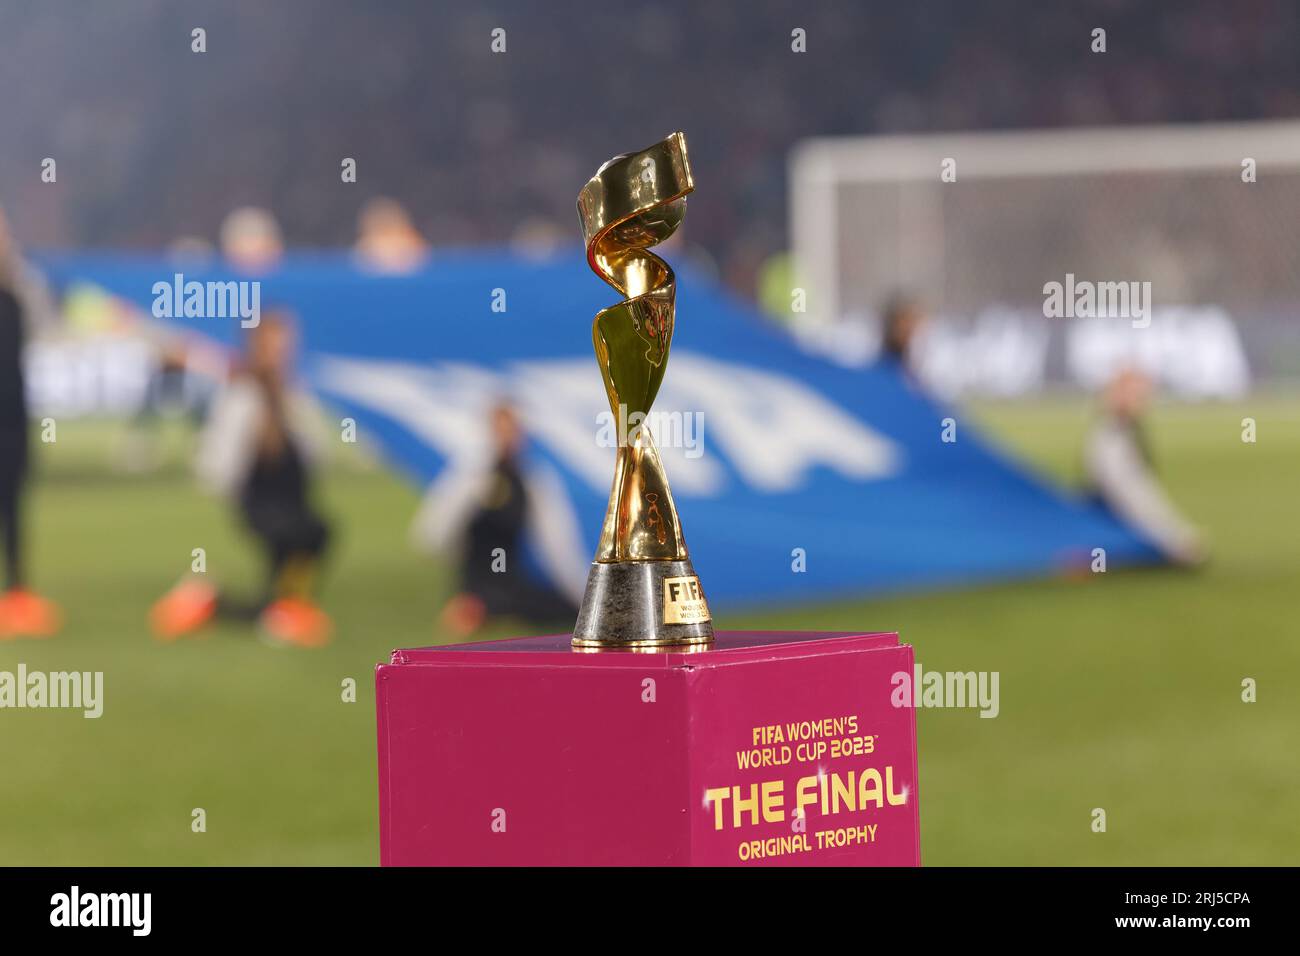 https://c8.alamy.com/comp/2RJ5CPA/sydney-australia-20th-aug-2023-the-trophy-on-display-before-the-fifa-womens-world-cup-australia-and-new-zealand-2023-final-match-between-spain-and-england-at-stadium-australia-on-august-20-2023-in-sydney-australia-credit-ioio-imagesalamy-live-news-2RJ5CPA.jpg